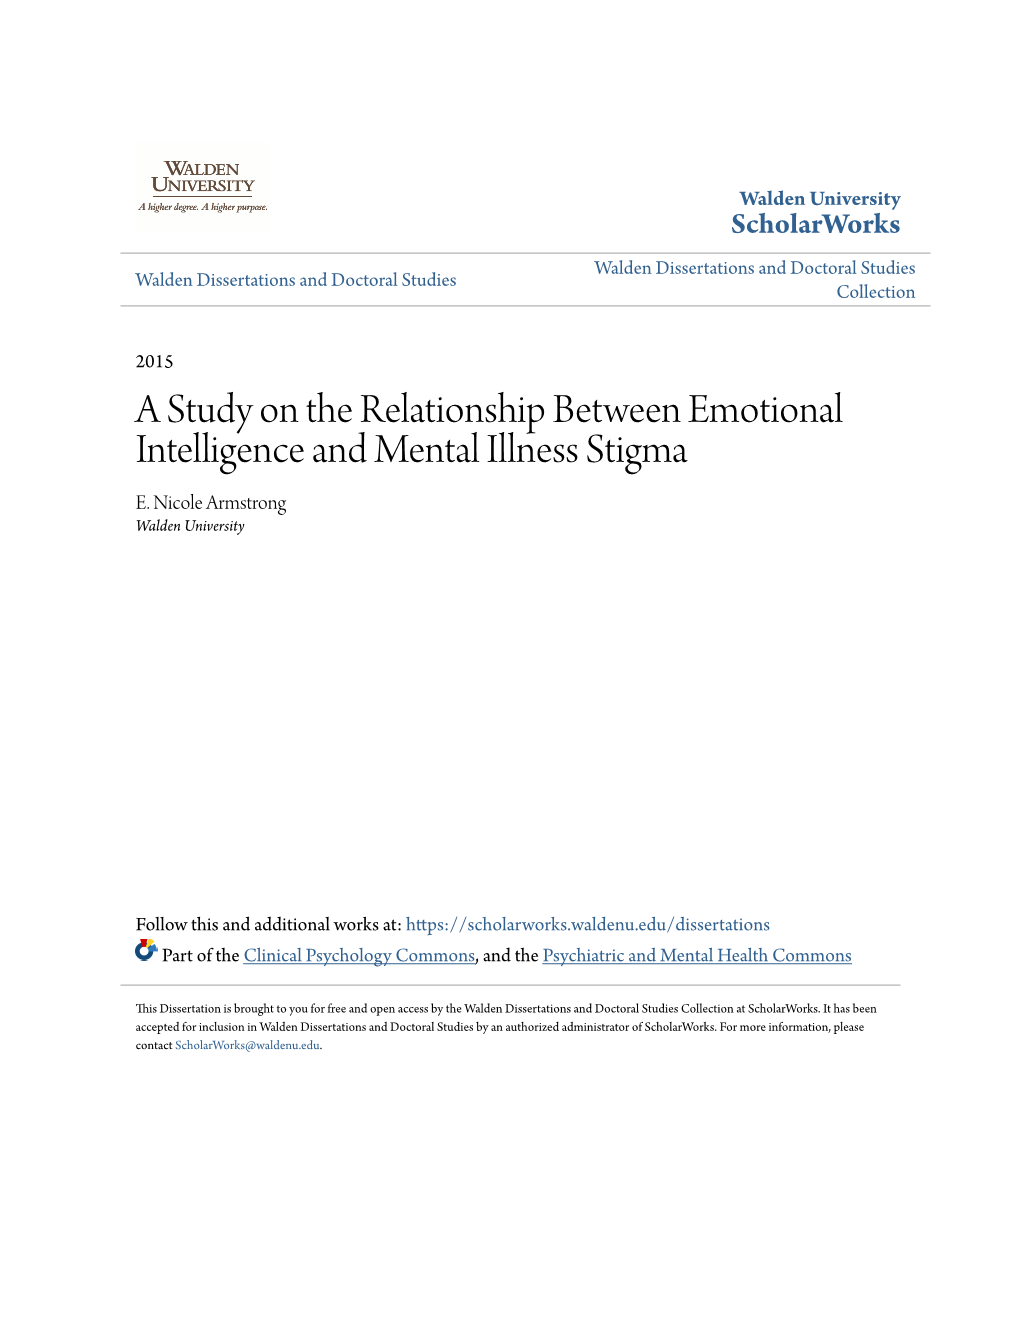 A Study on the Relationship Between Emotional Intelligence and Mental Illness Stigma E